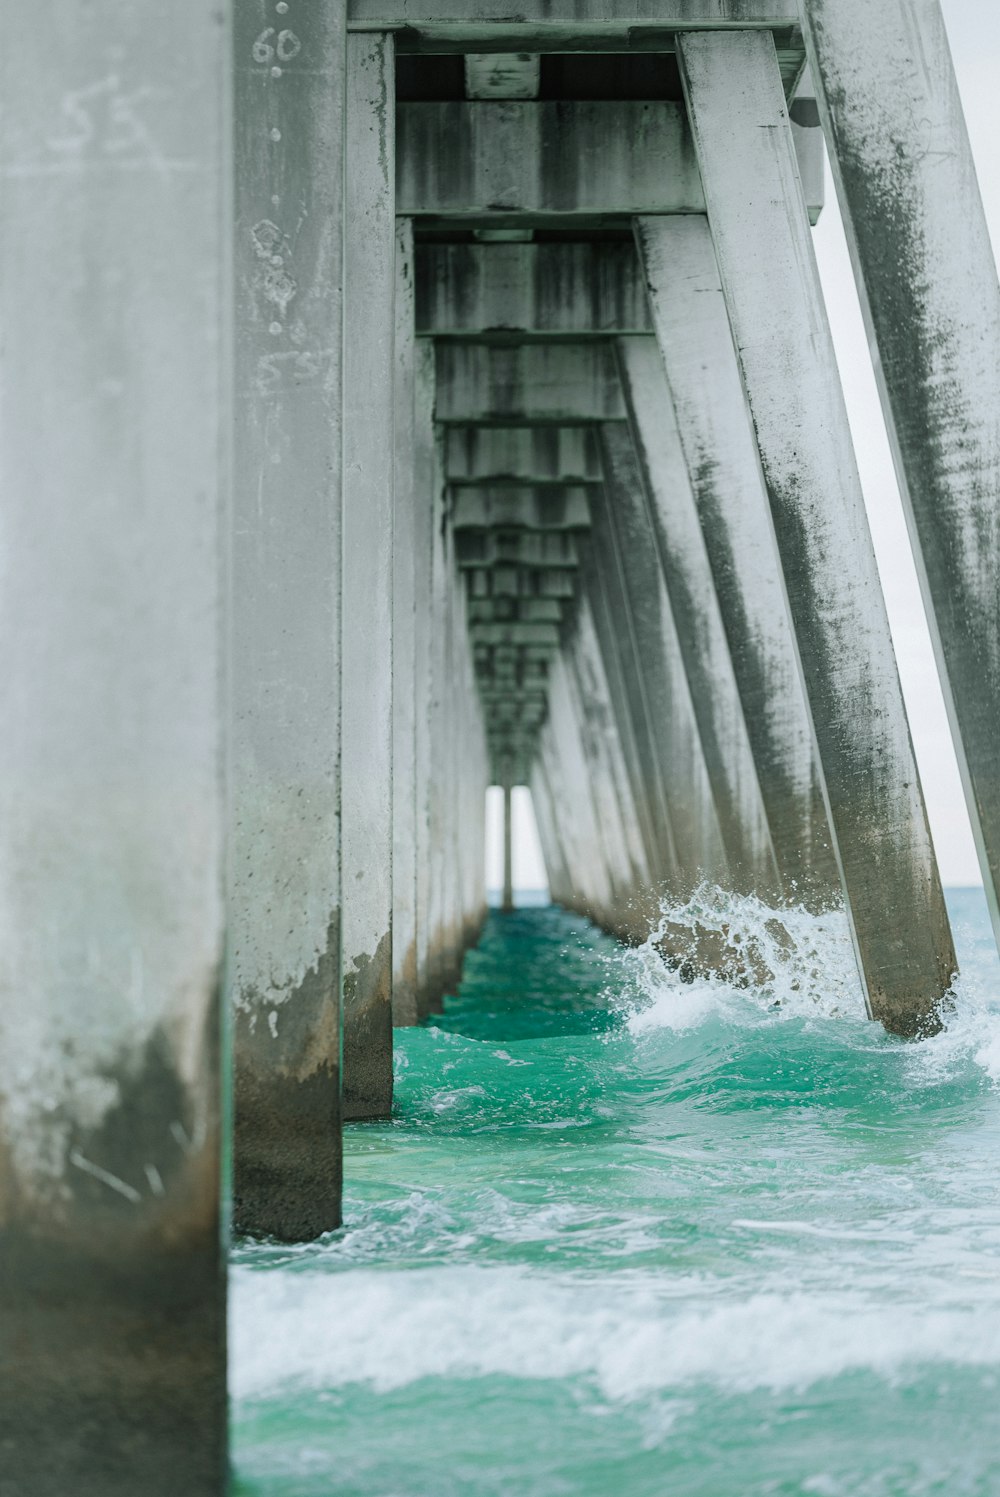 the underside of a bridge with water underneath it